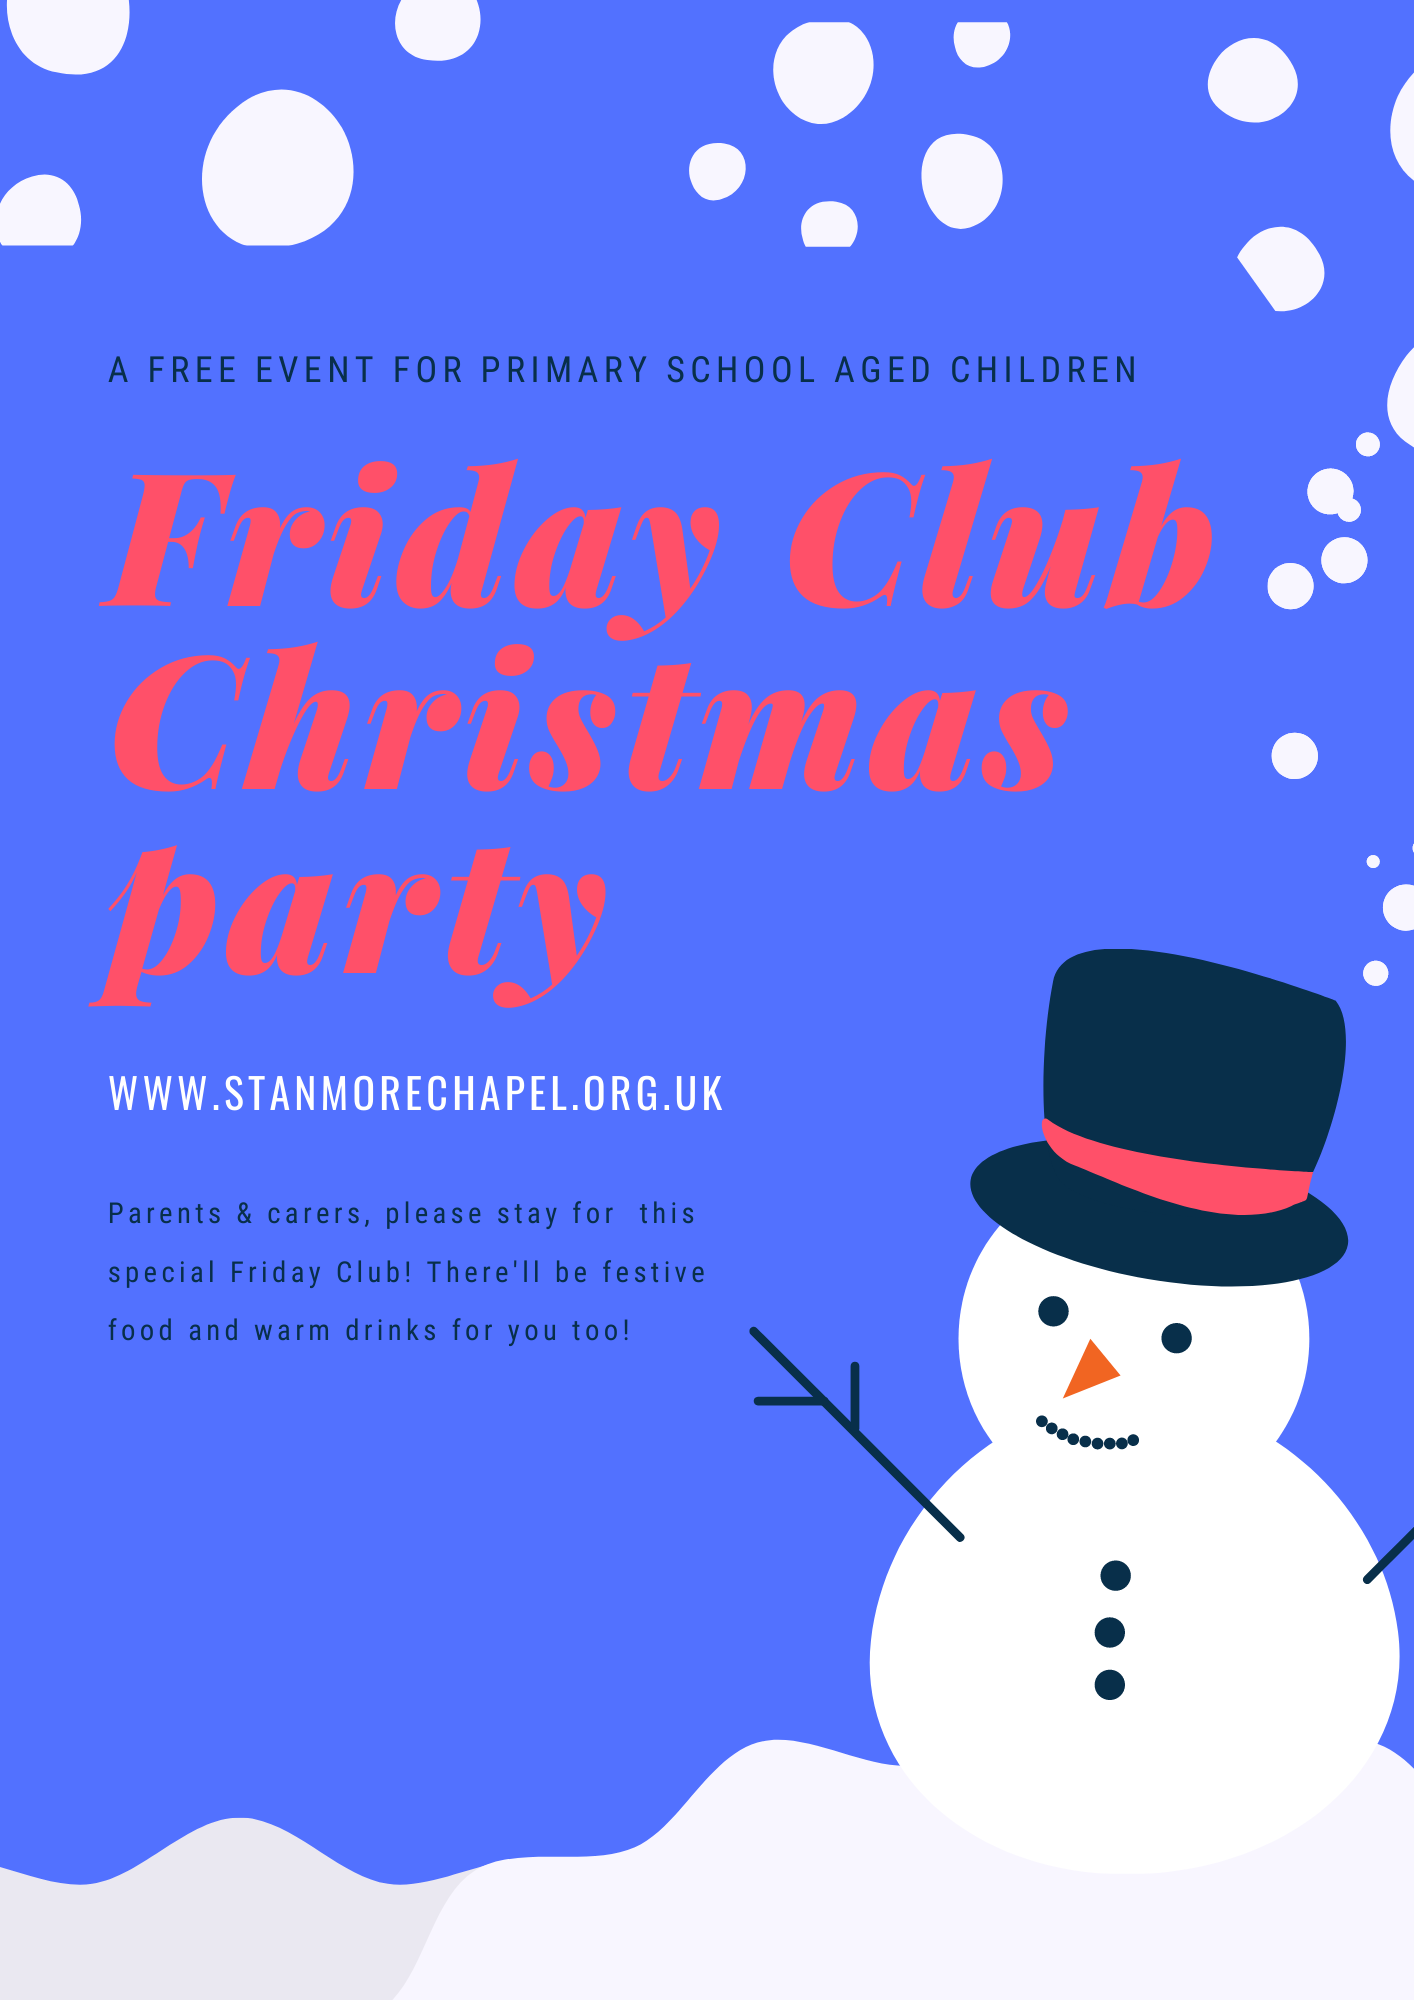 Friday Club Christmas party re